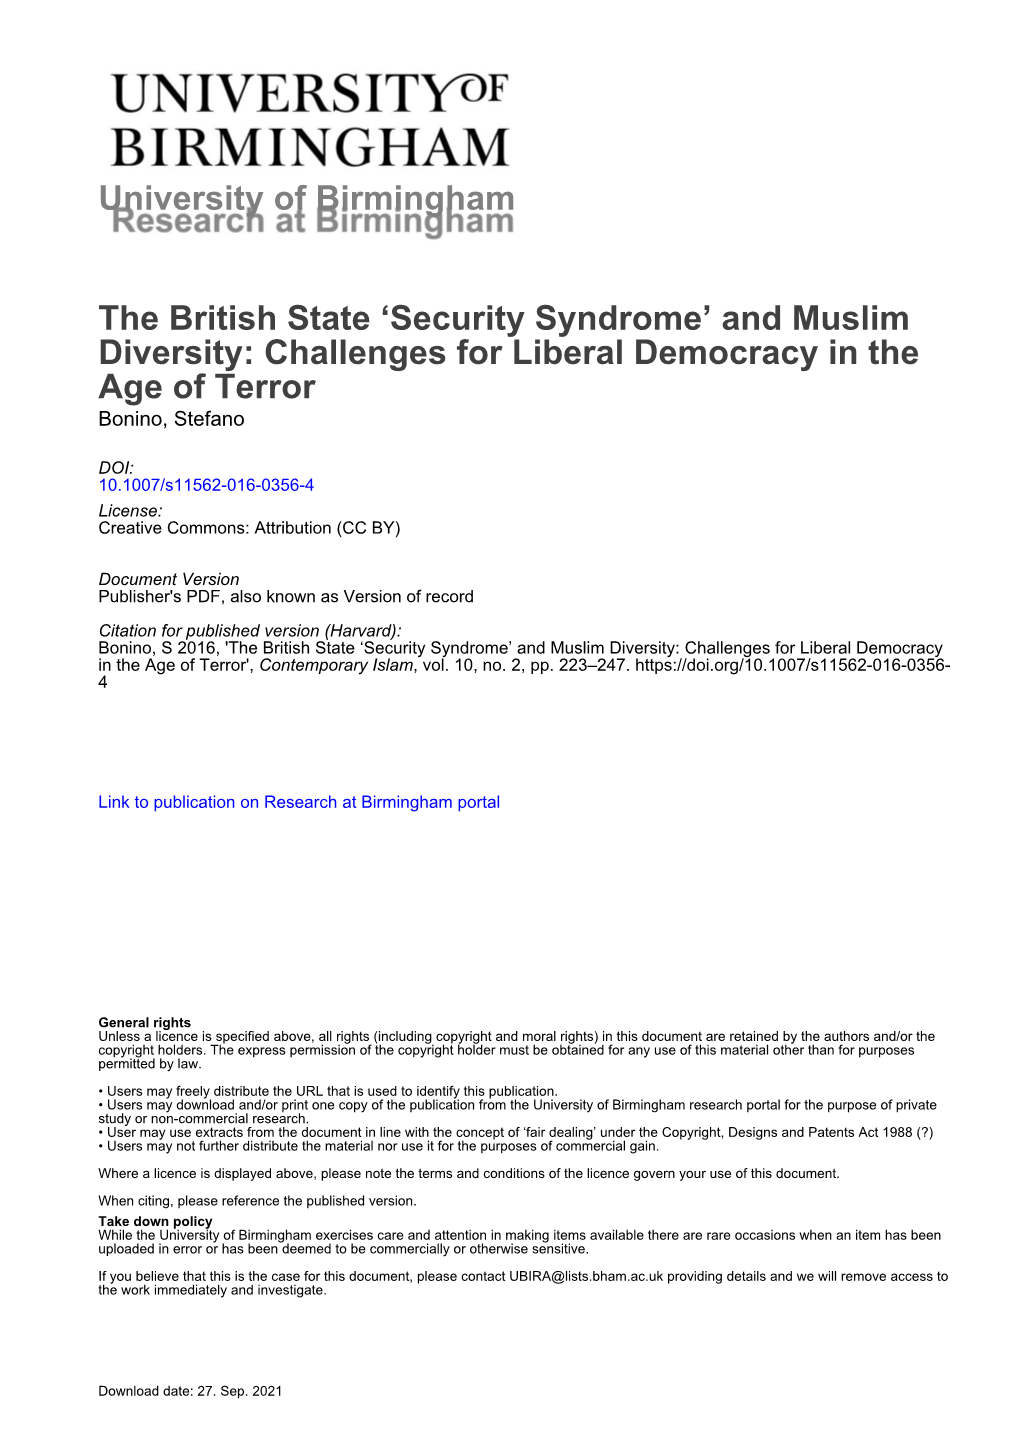 The British State 'Security Syndrome' and Muslim Diversity